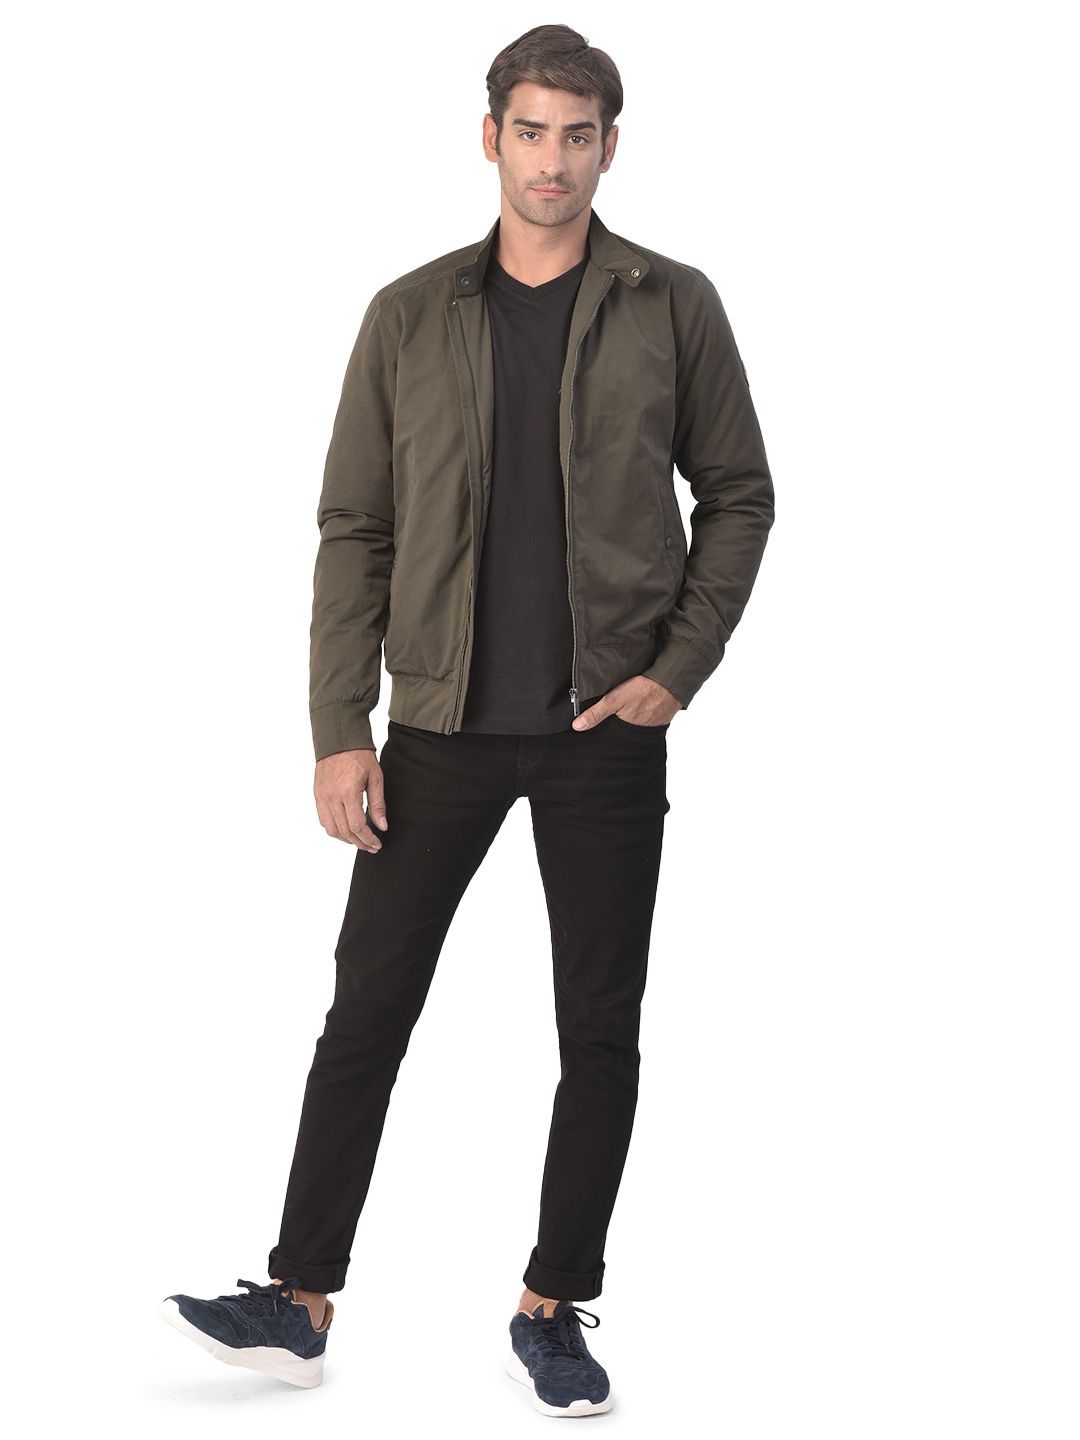 Buy Woodland Mens Cotton Casual Regular Jacket (Olive, M) at Amazon.in